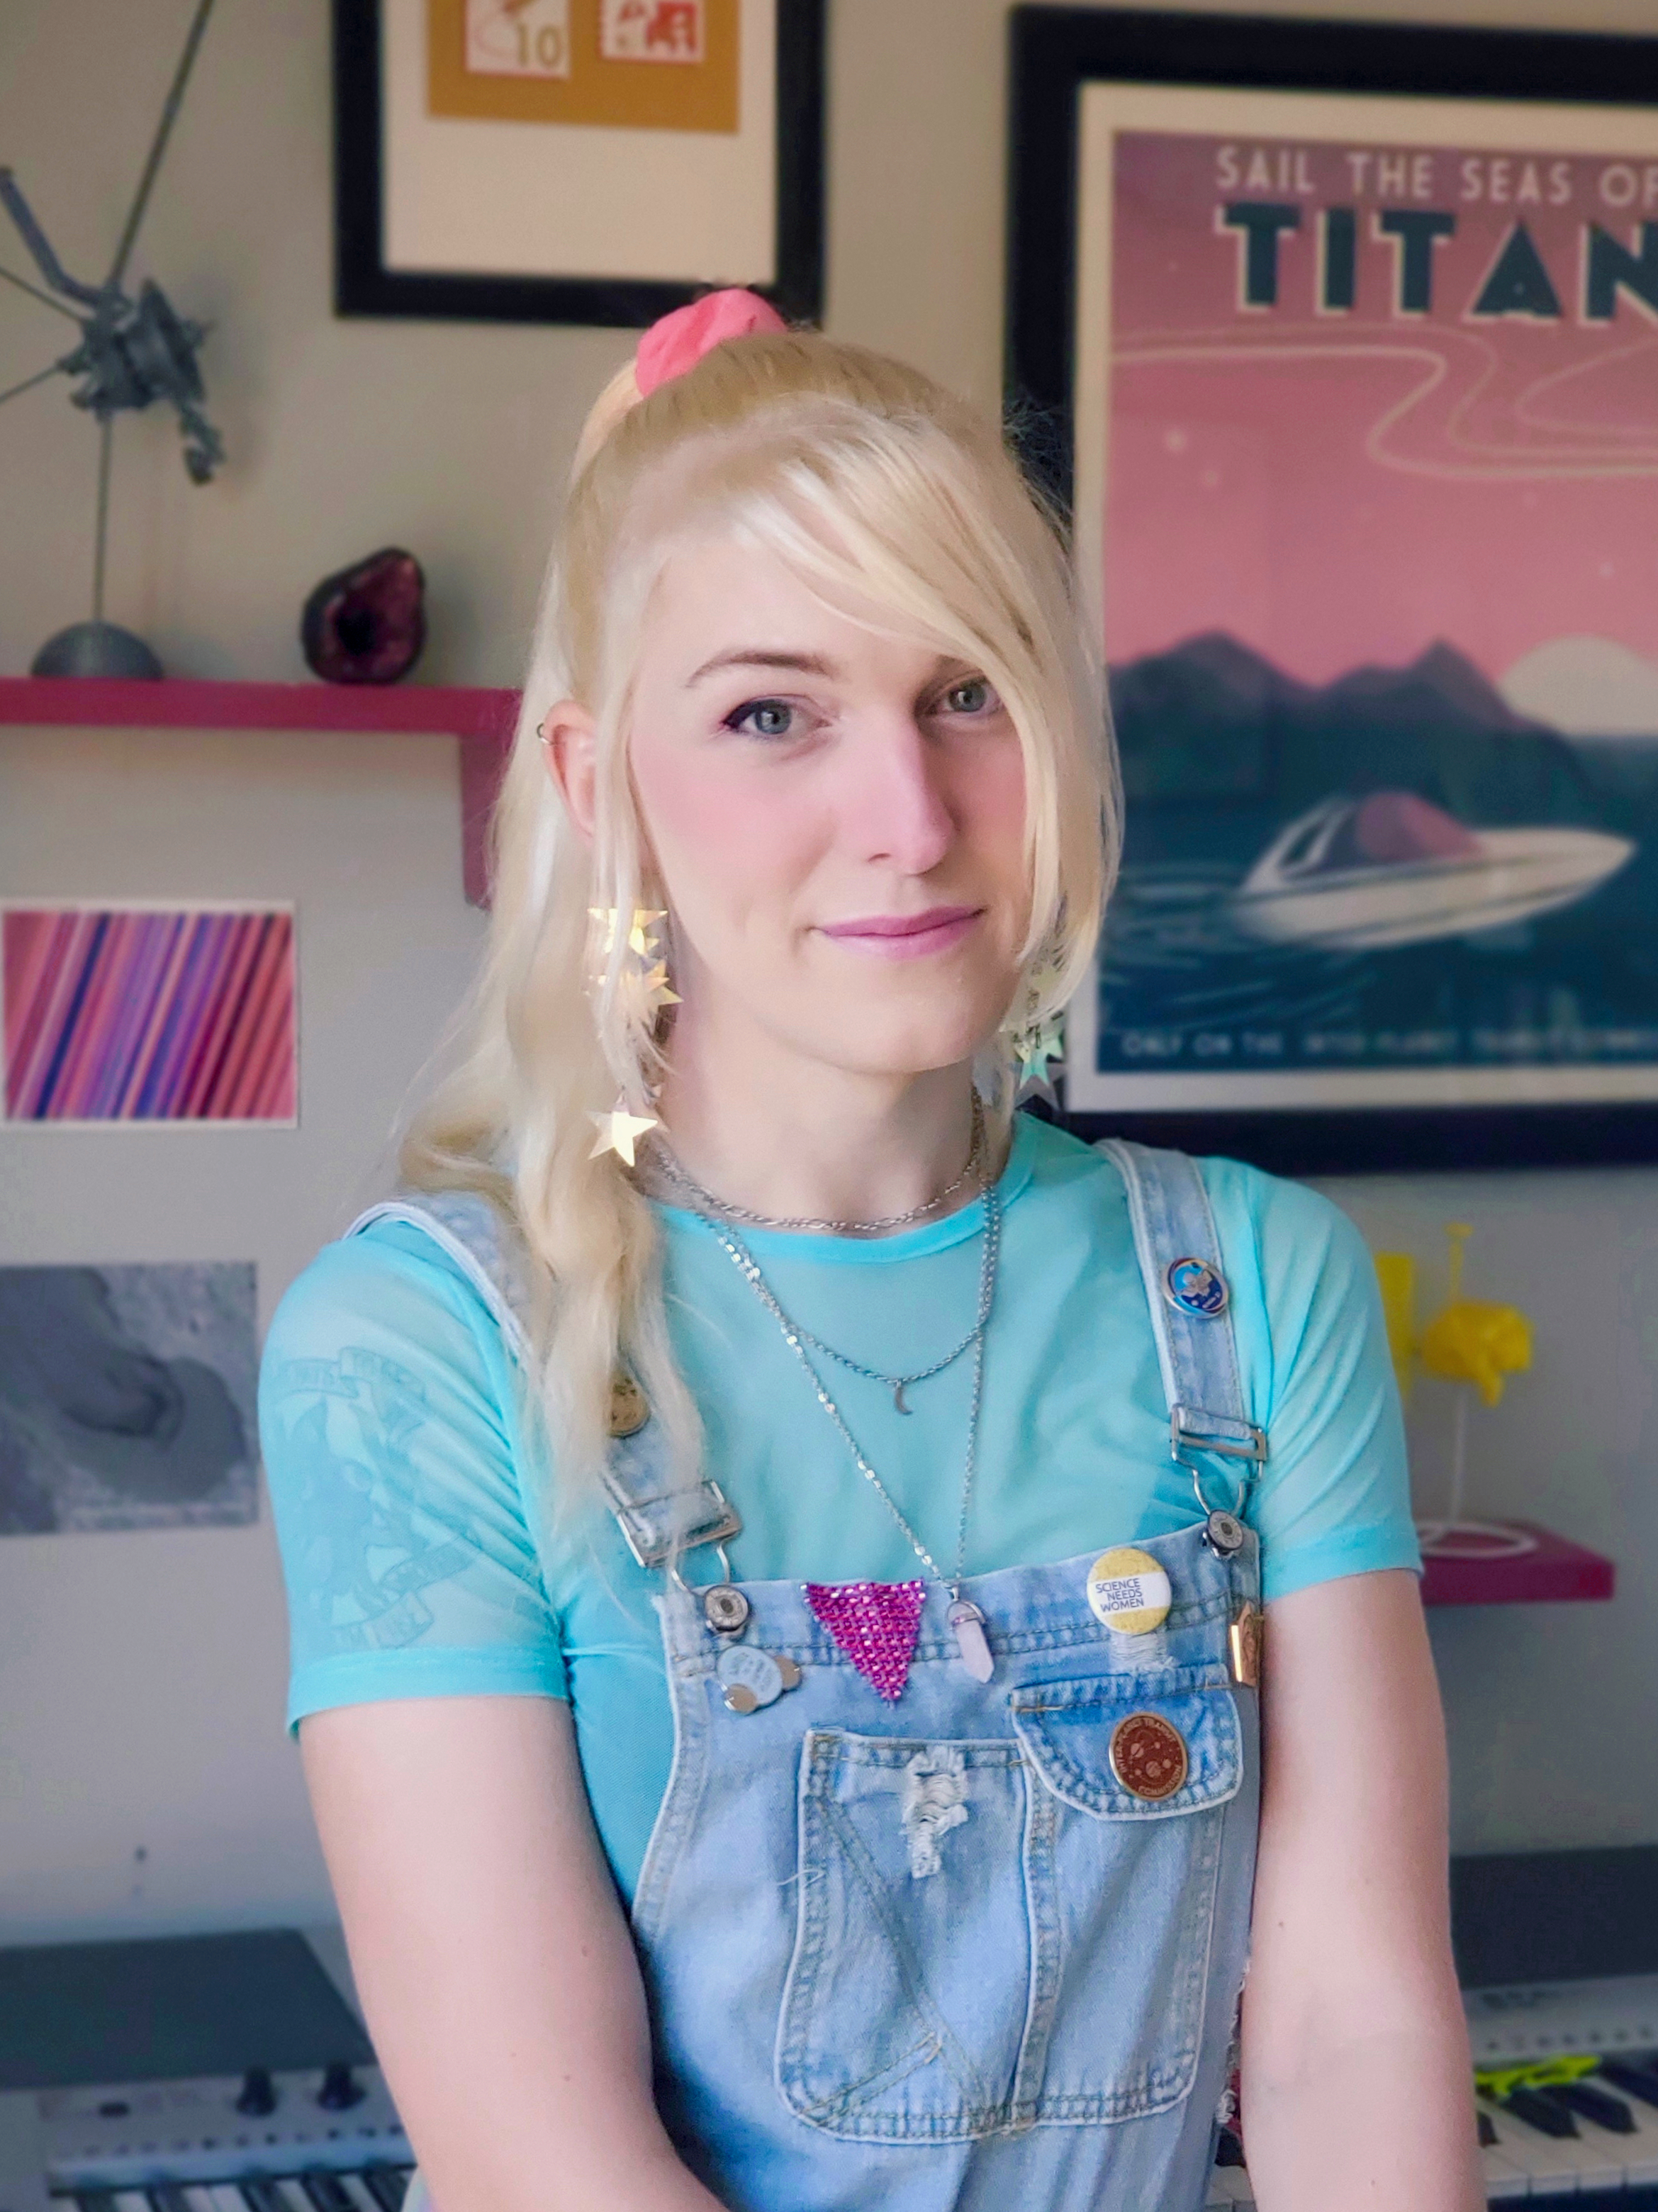 Profile image of Cailin. She has long blonde hair in a ponytail, and is wearing overalls with various space- and science-related pins on them. Behind her are several of her favourite knick-knacks, including rocks, posters, and spacecraft models.